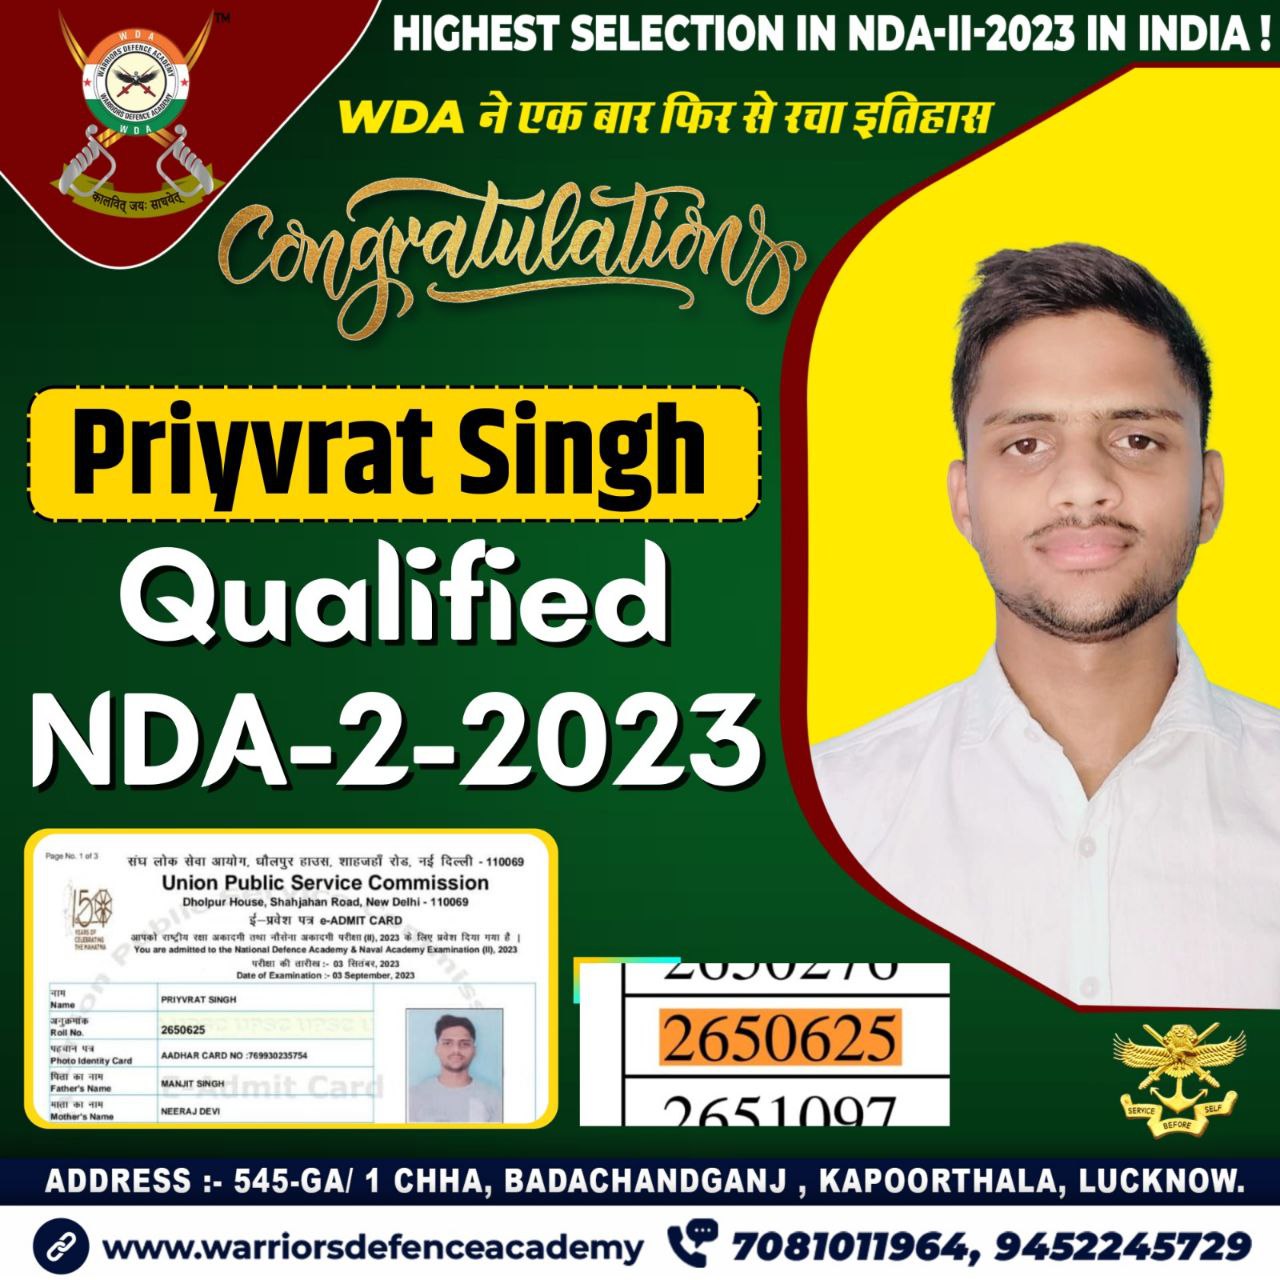 NDA-2 2023 Result Declared: Check Official PDF Here